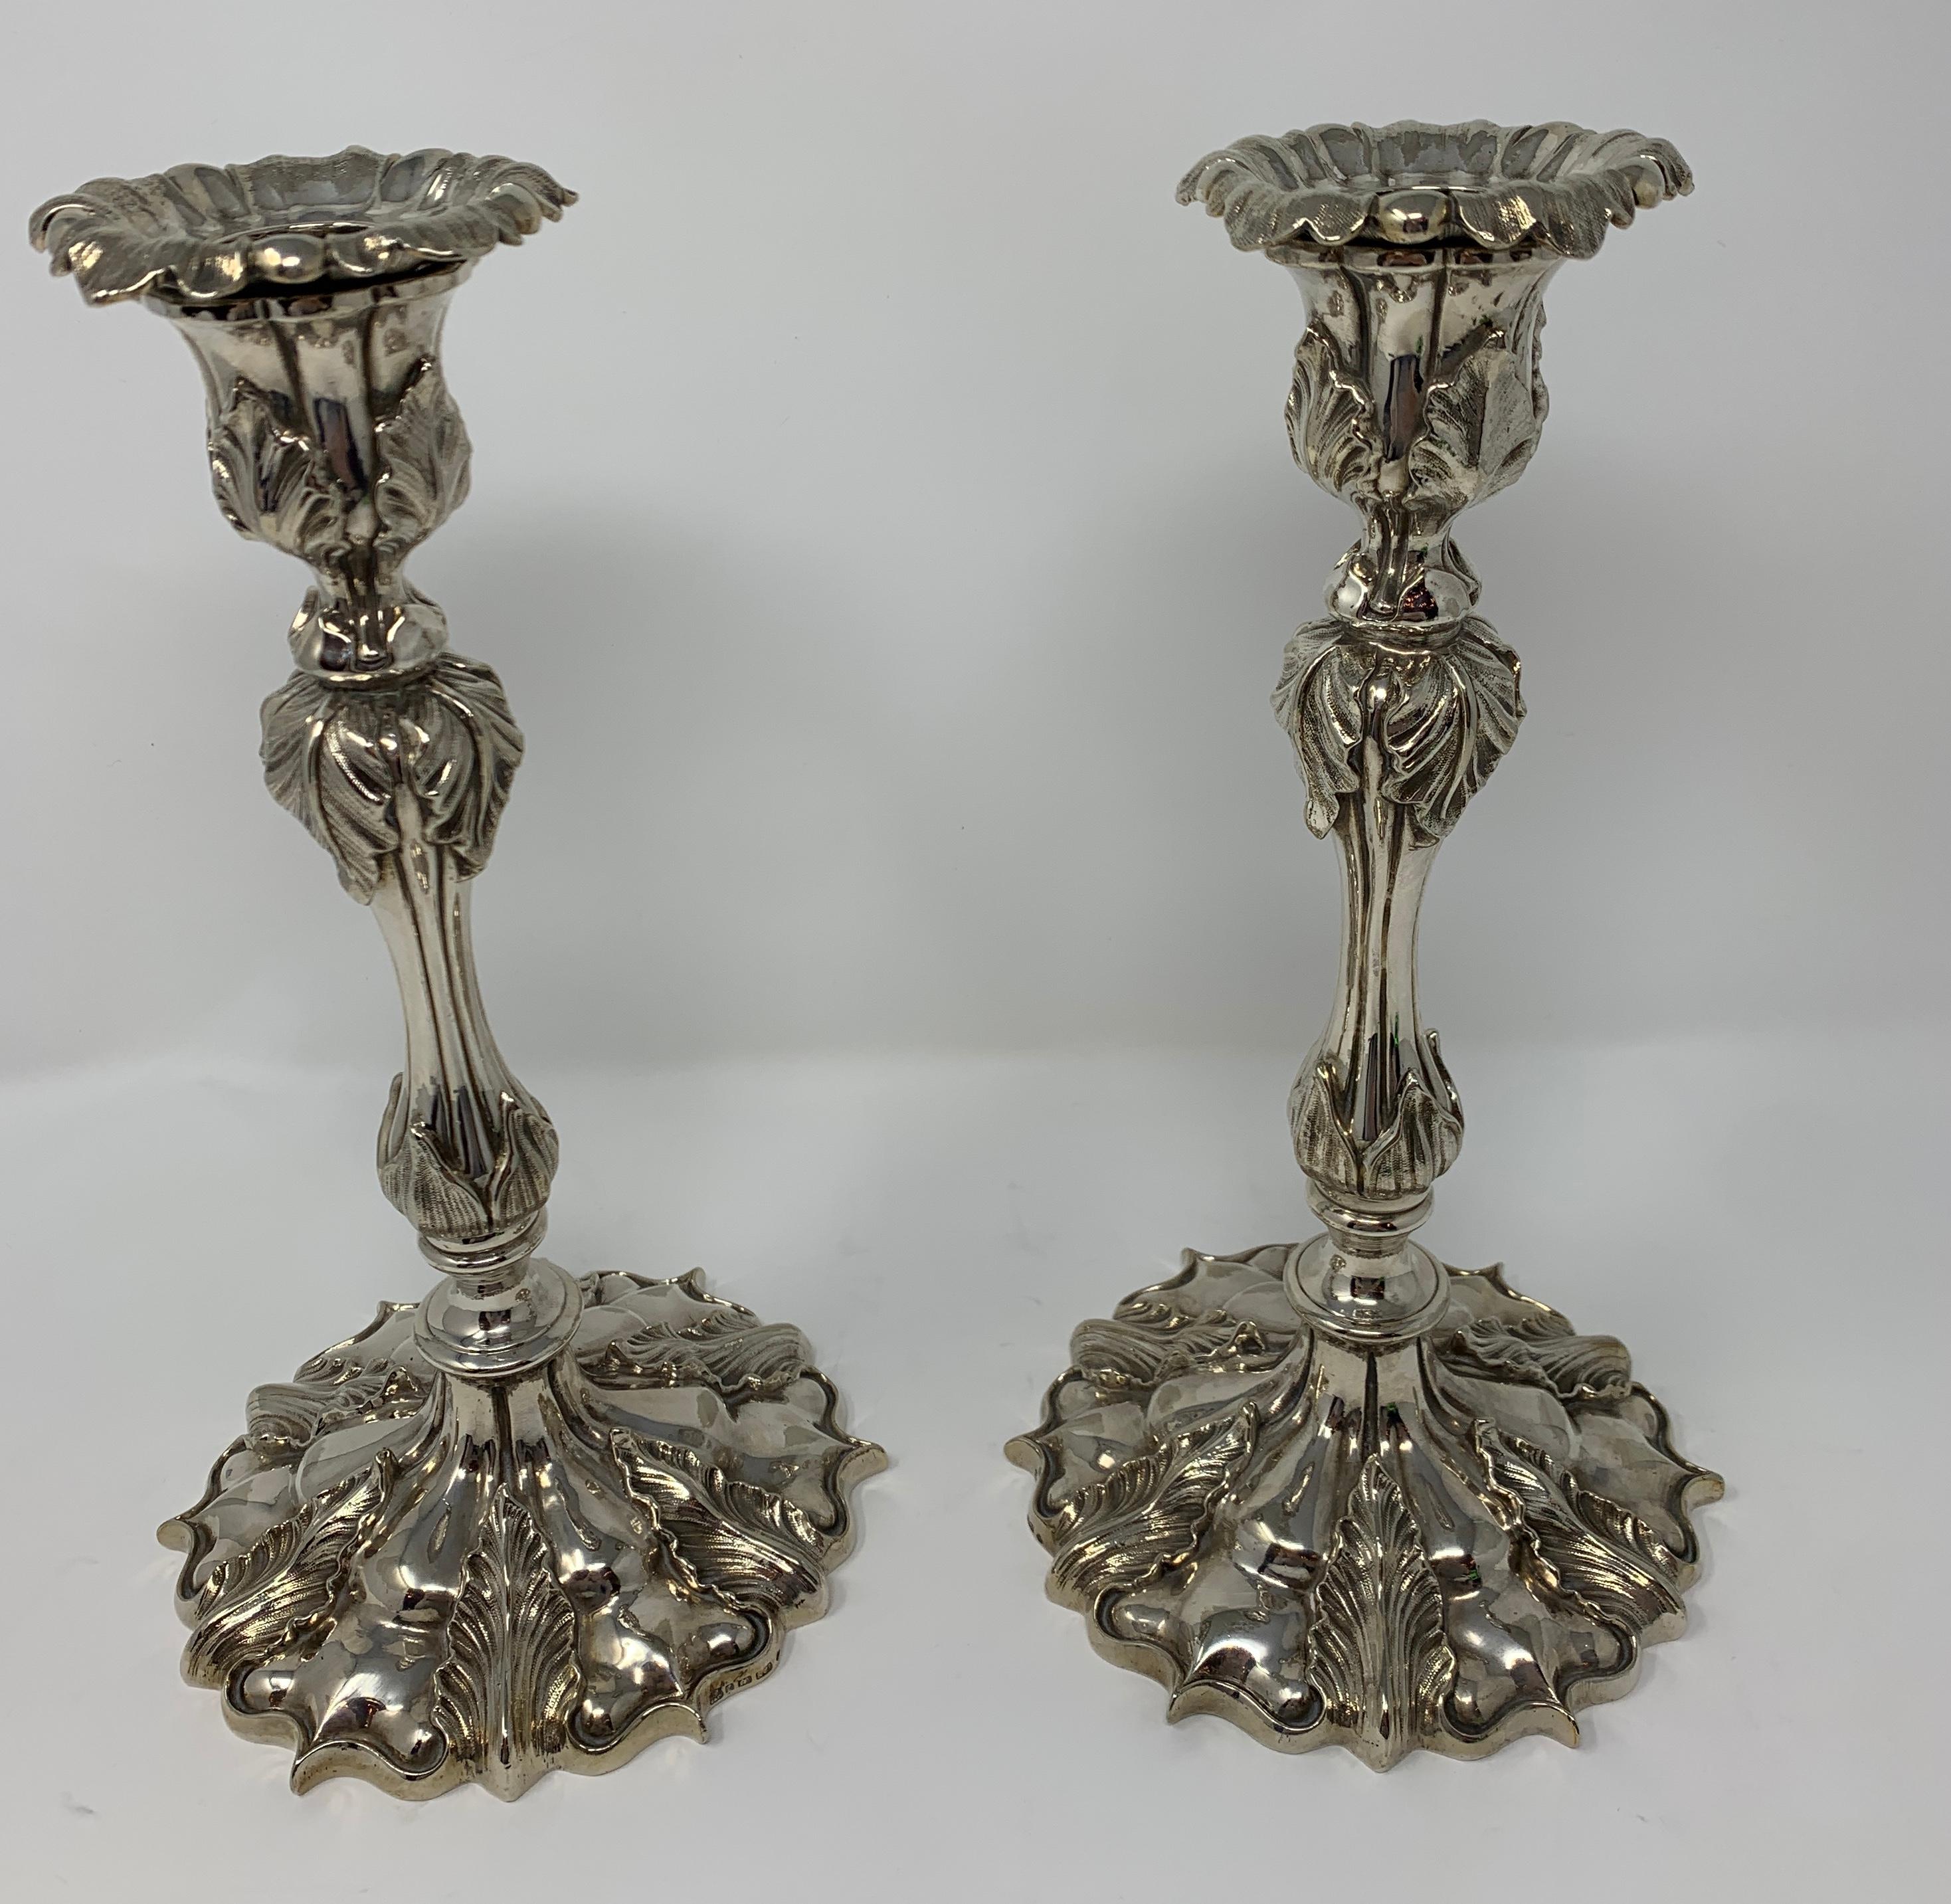 Victorian candlesticks with lovely form. Sure to be a wonderful addition to any dining table or sideboard.